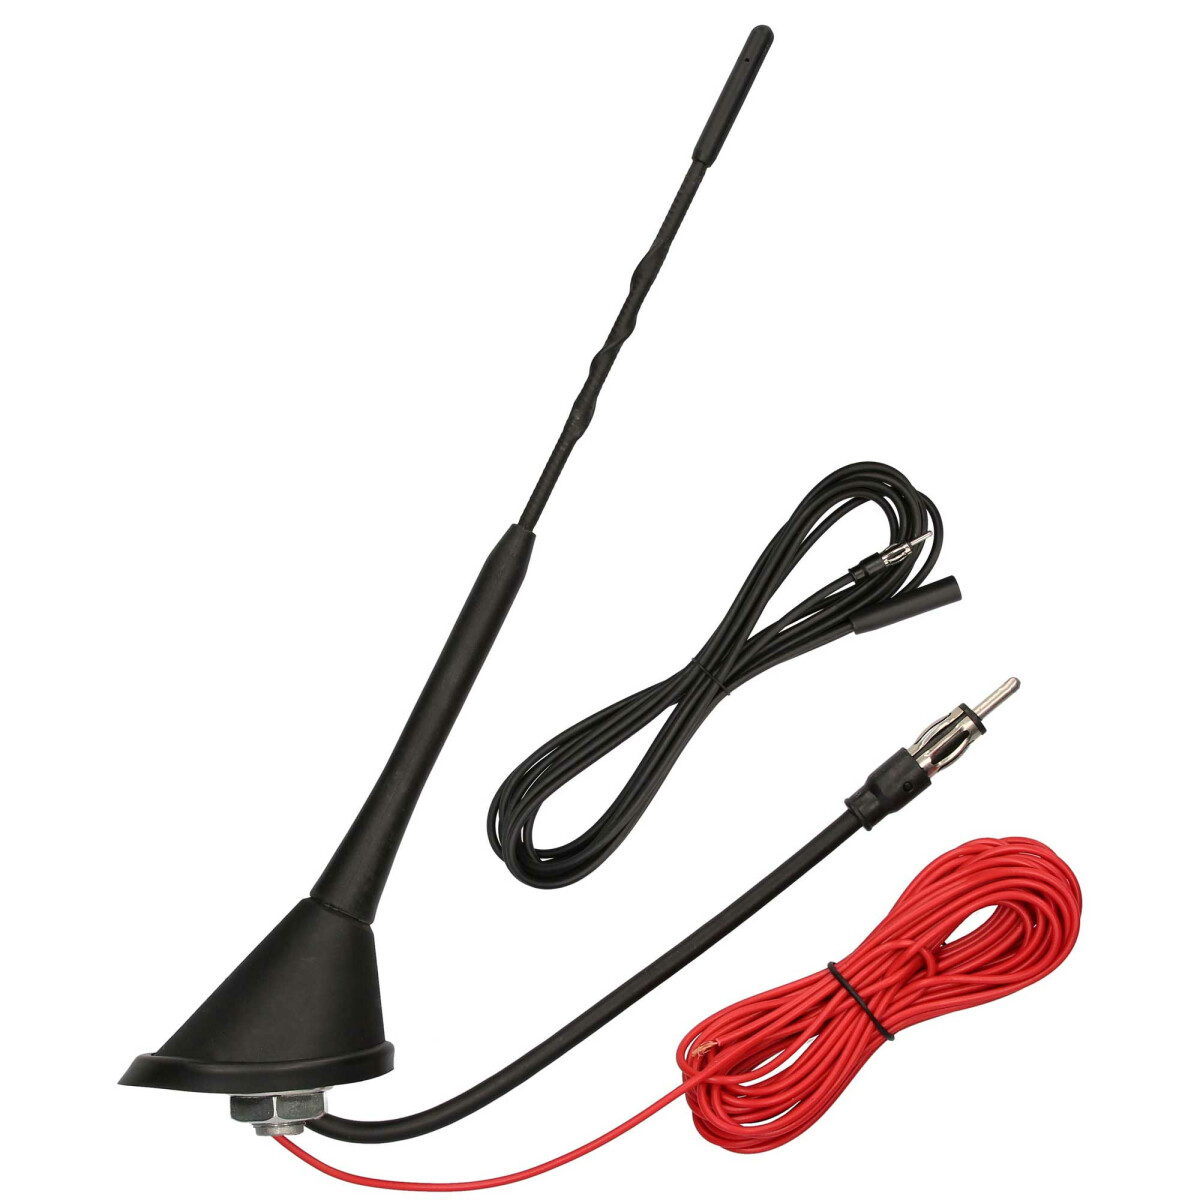 Audioproject A289 Autoantenne 24cm Fuß 5m Strom Kabel AM FM UKW